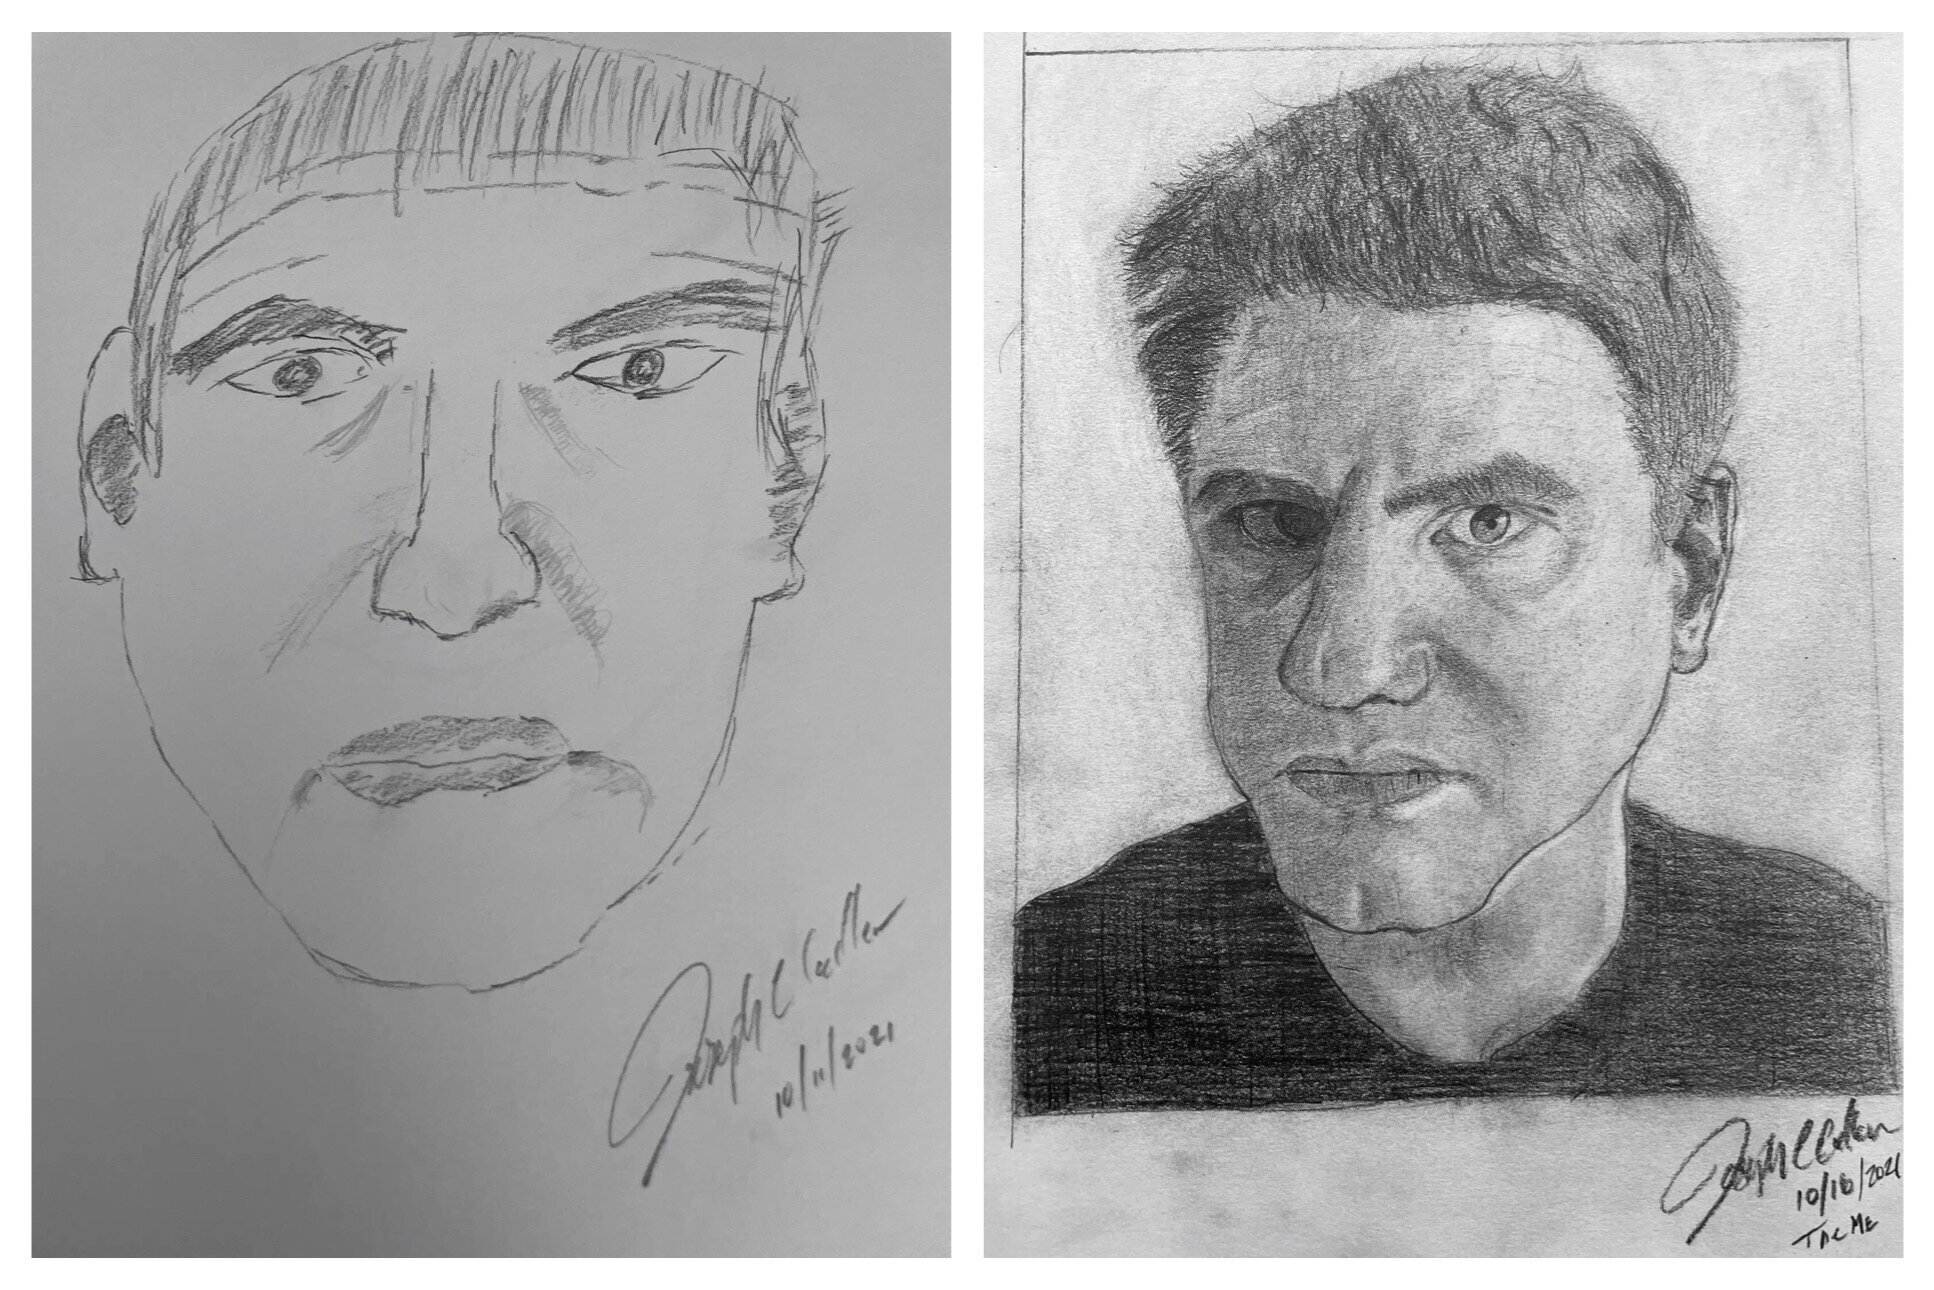 Joseph's Before and After Self Portrait Drawings Oct 11-6, 2021